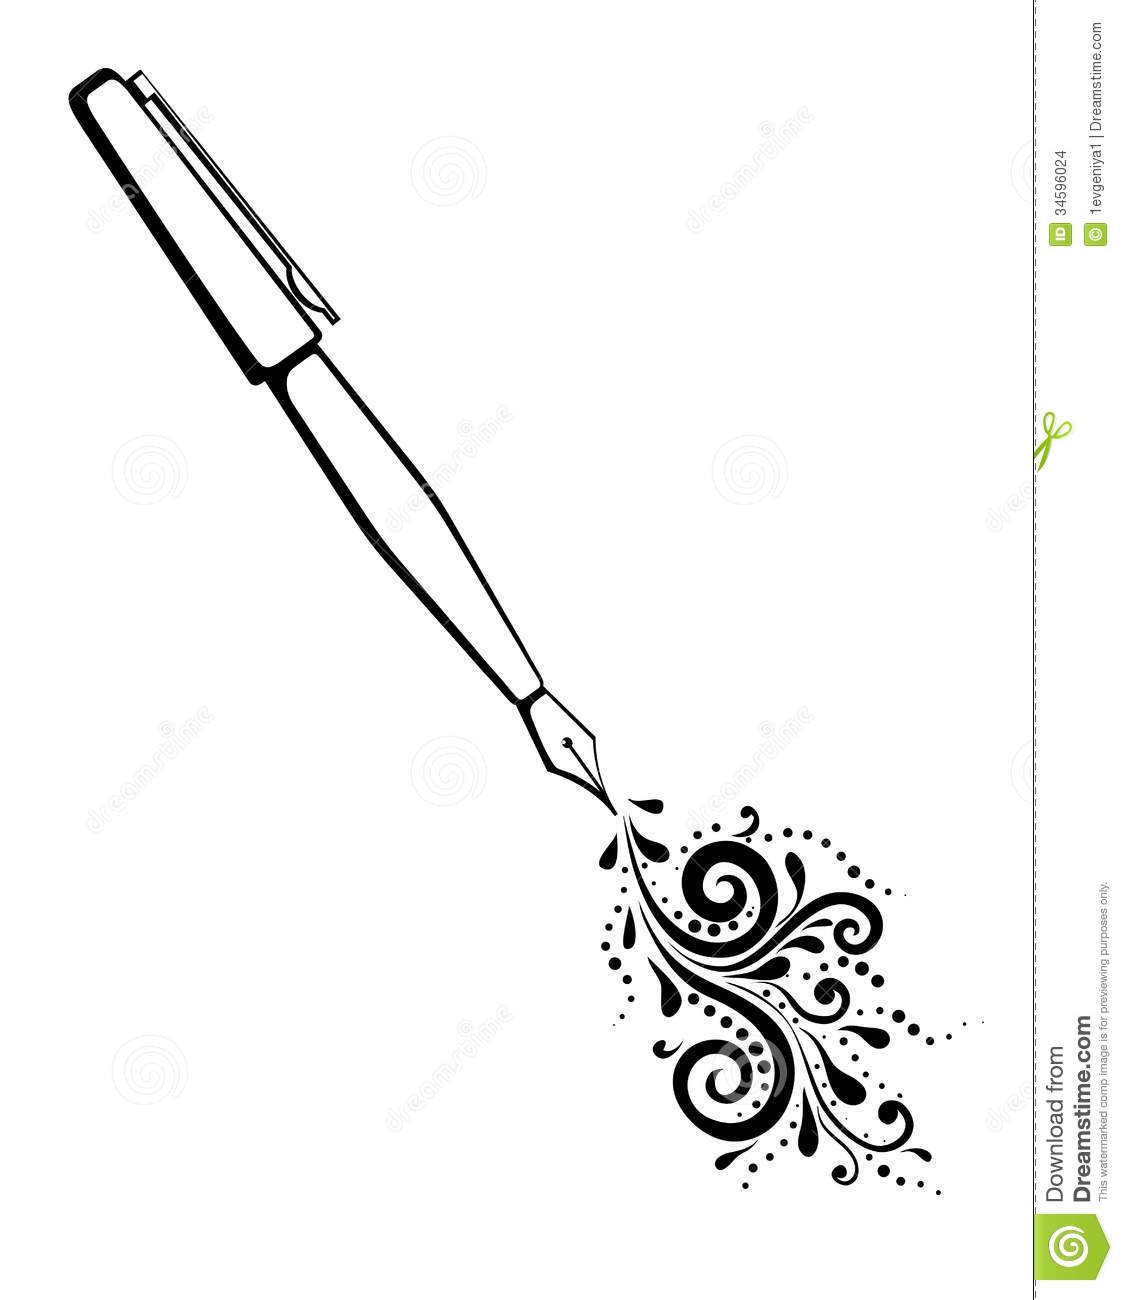 Black And White Outline Of An Ink Pen With A Painted Floral Design Of